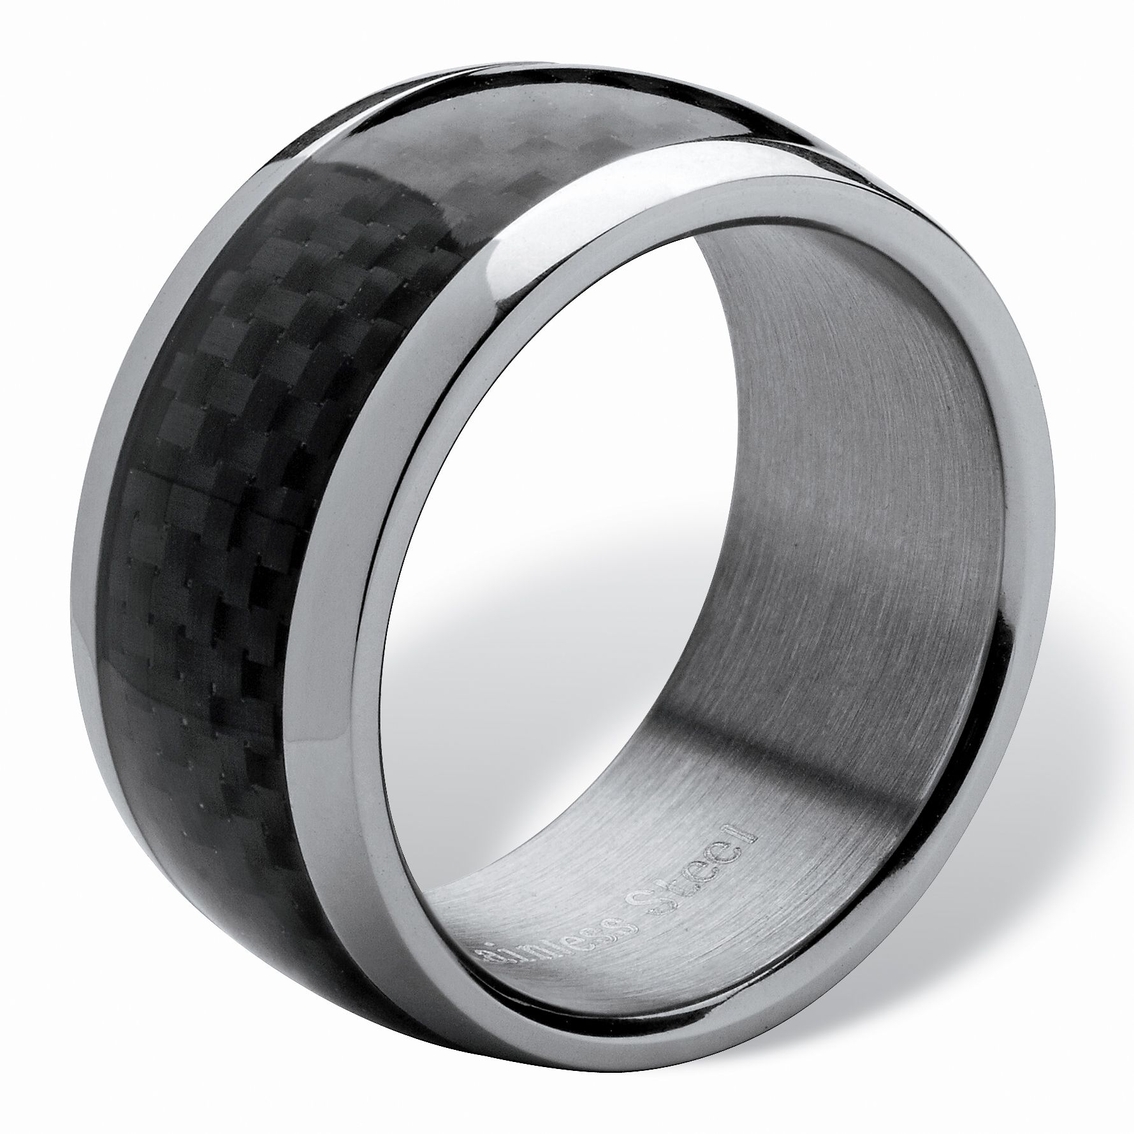 Men's Black Checkerboard Motif Band in Ion-Plated Stainless Steel (11mm) Sizes 7-16 - Image 2 of 5